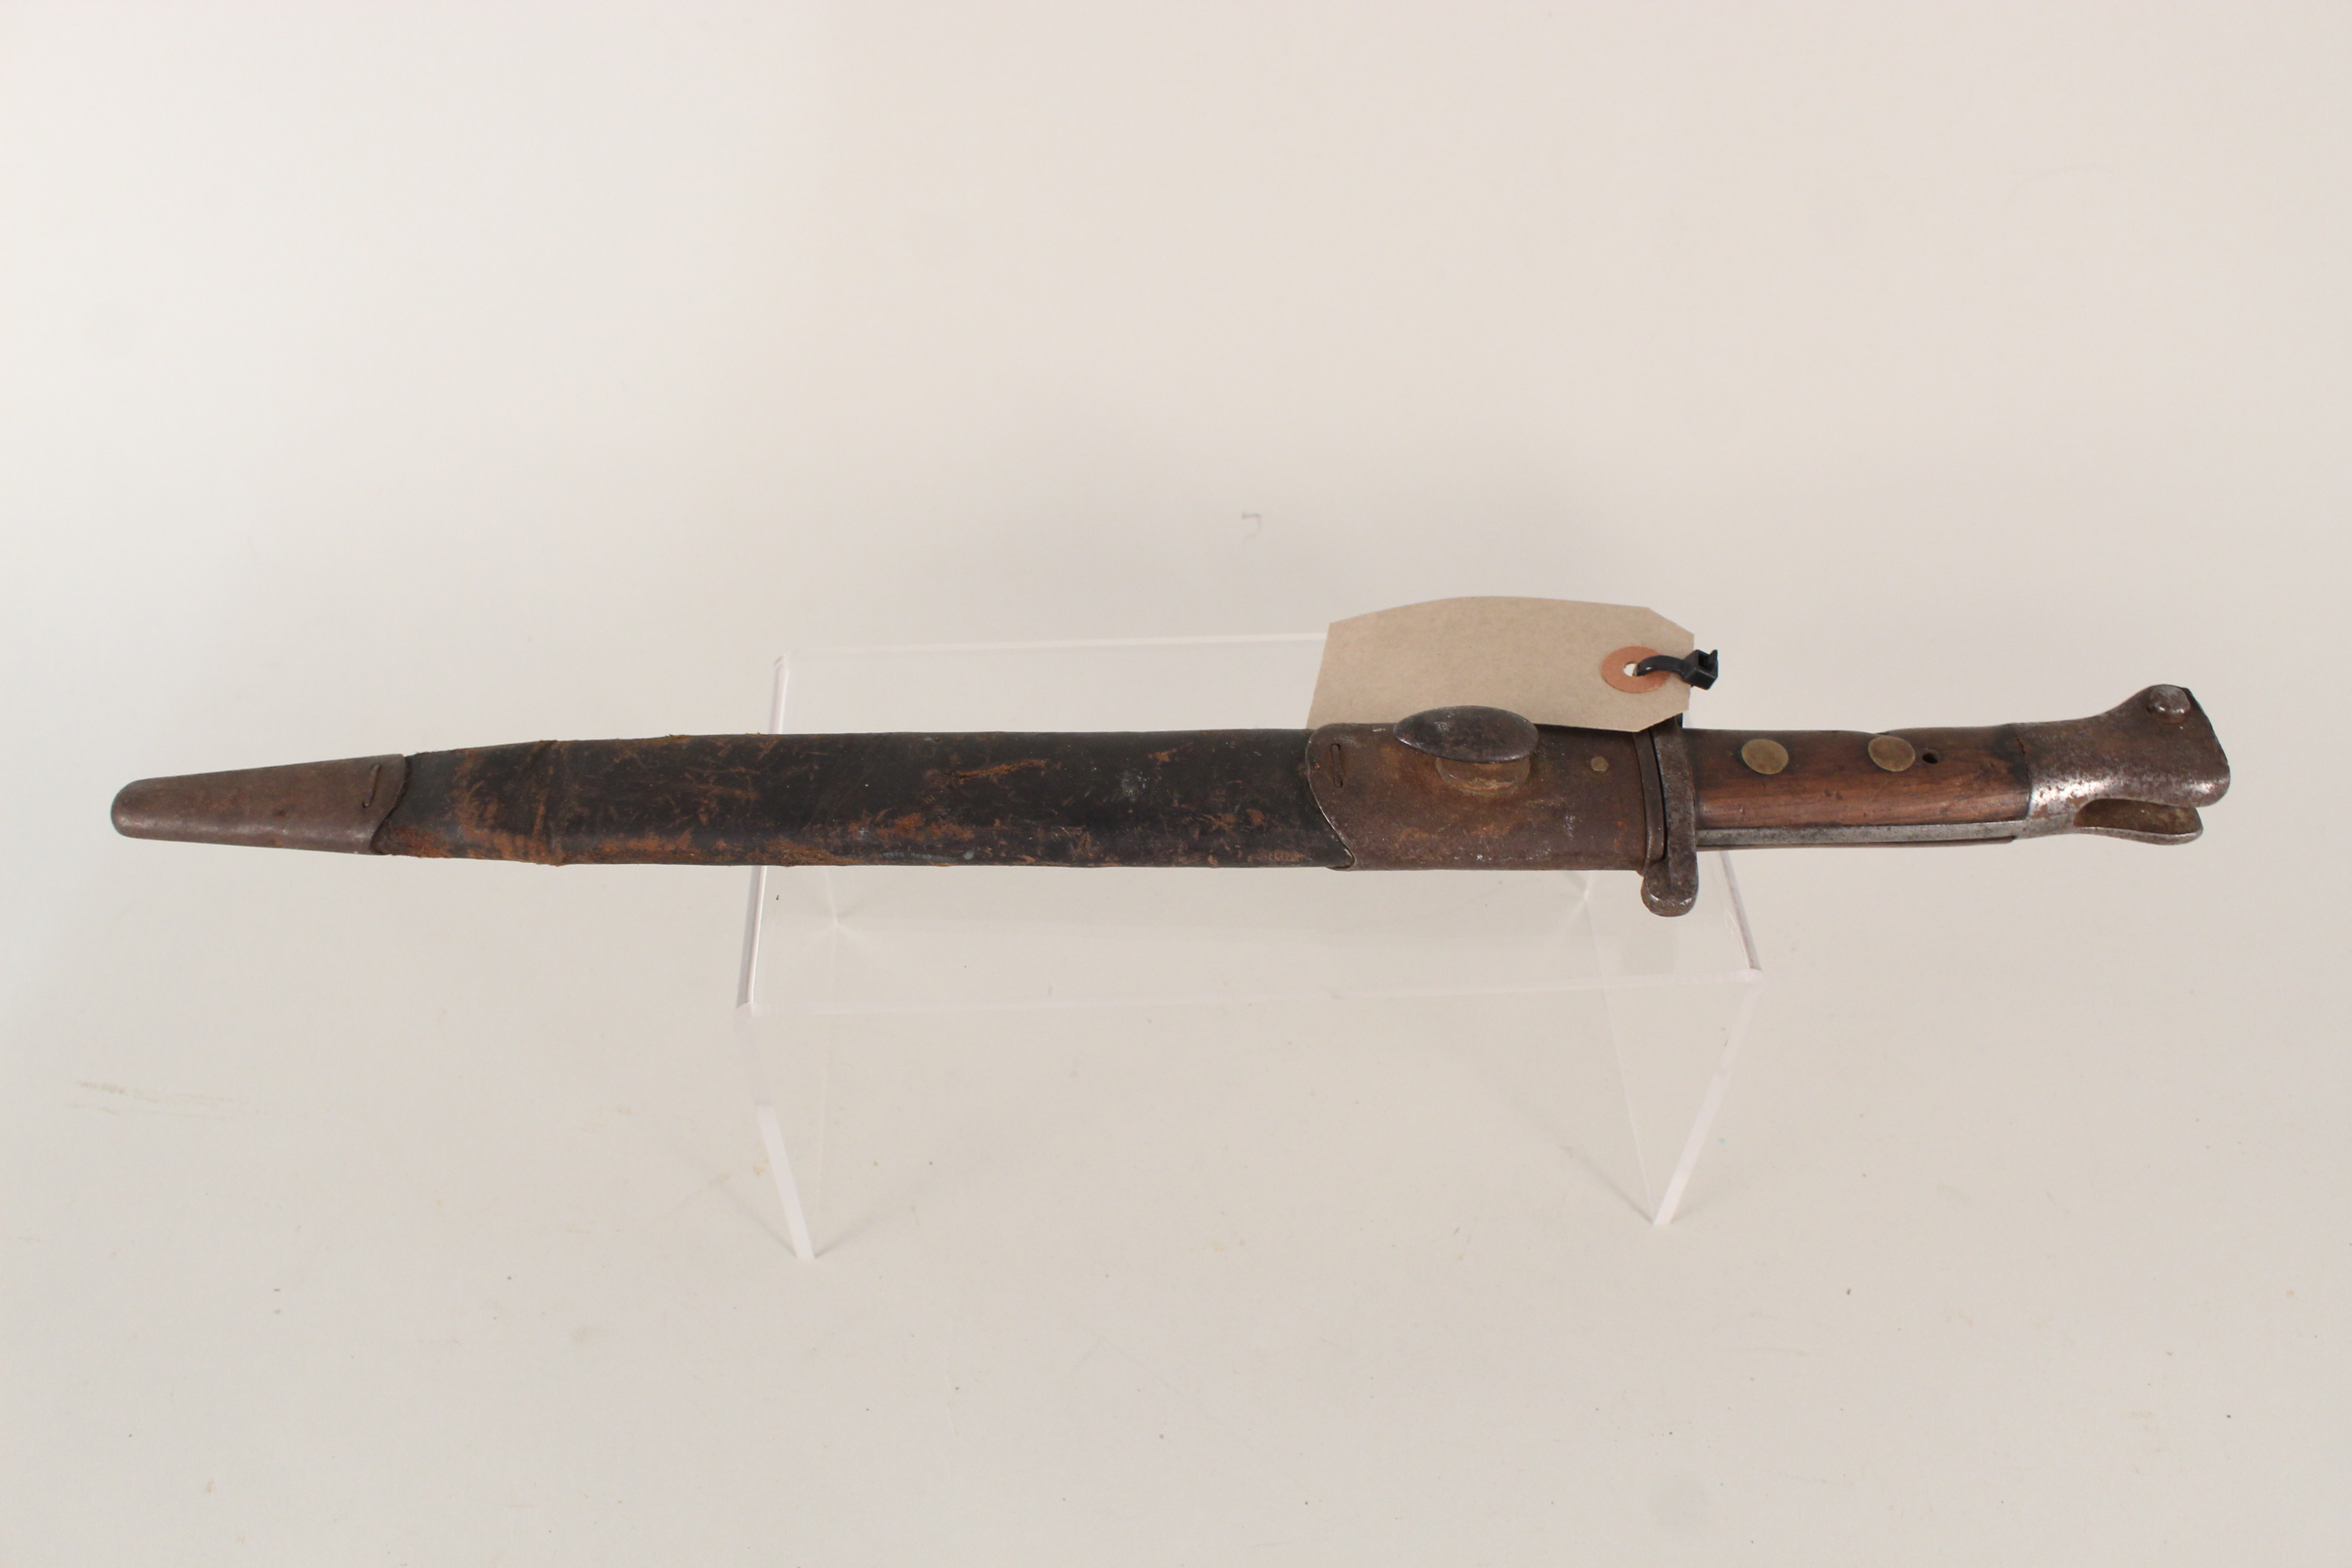 A British 1888 model bayonet (Mk I 2nd type) by Mole with scabbard (in overall worn condition) - Image 4 of 4